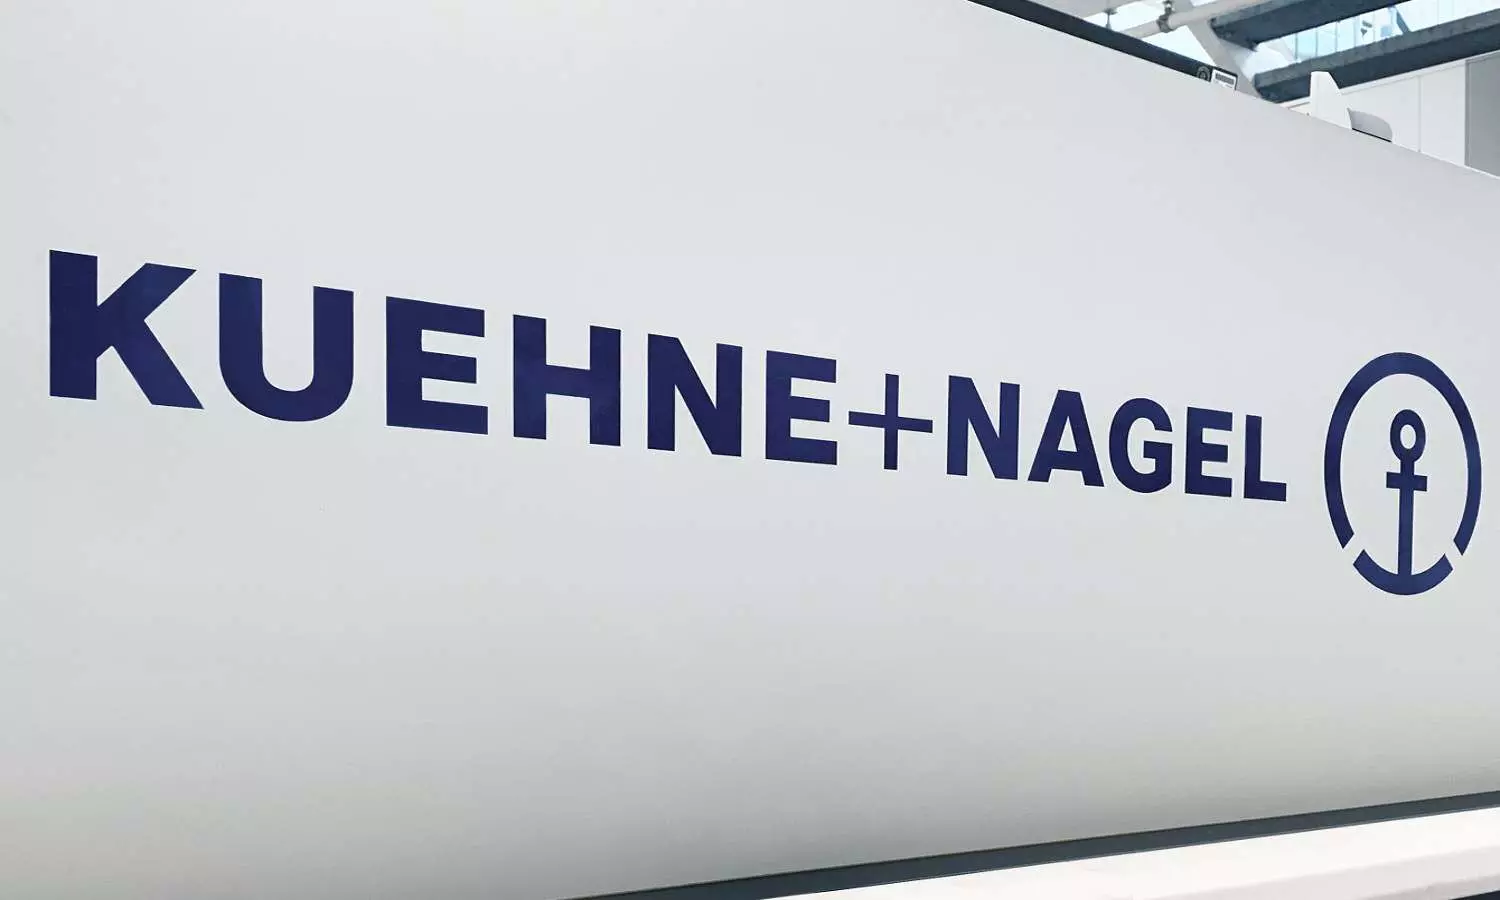 Kuehne+Nagel is appointed official freight forwarding, logistics supporter of Team GB